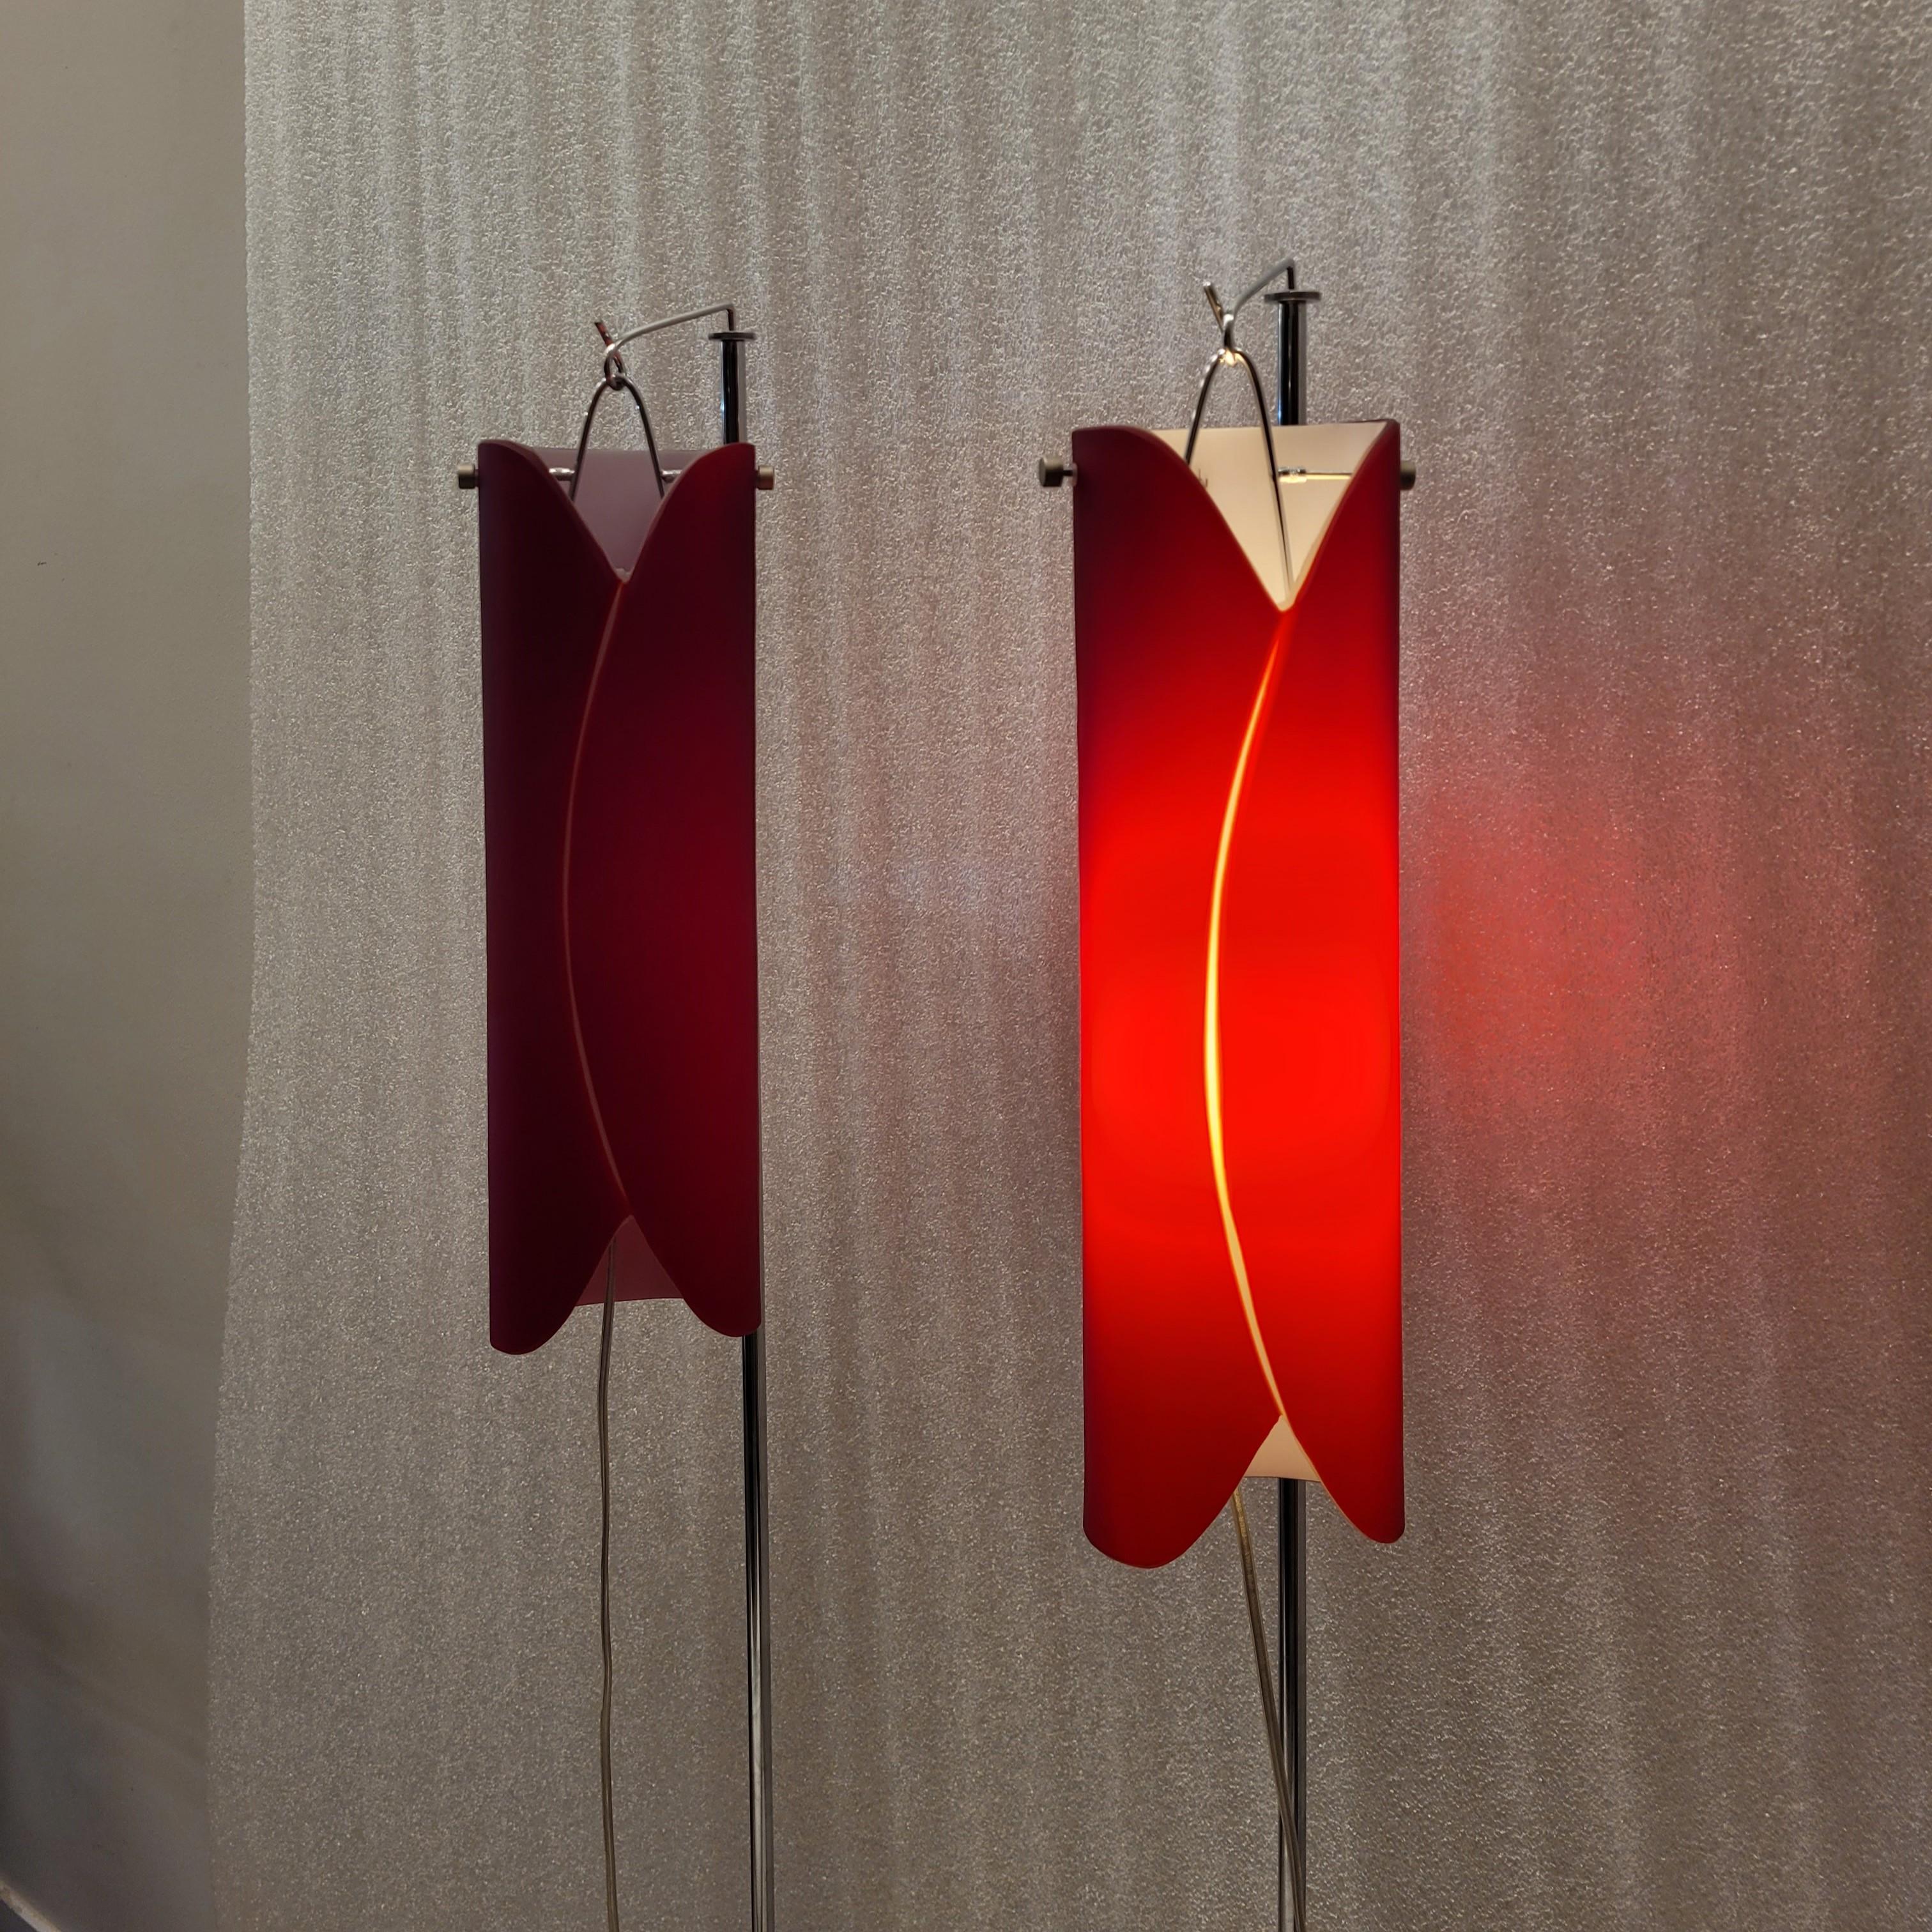 Red steel lamps made of Murano glass and Roche Bobois steel.
Beautiful floor lamps, glass from Murano Italy, bent glass, red on the outside and white on the inside, in the shape of a flower bud hanging from a support installed on a polished steel